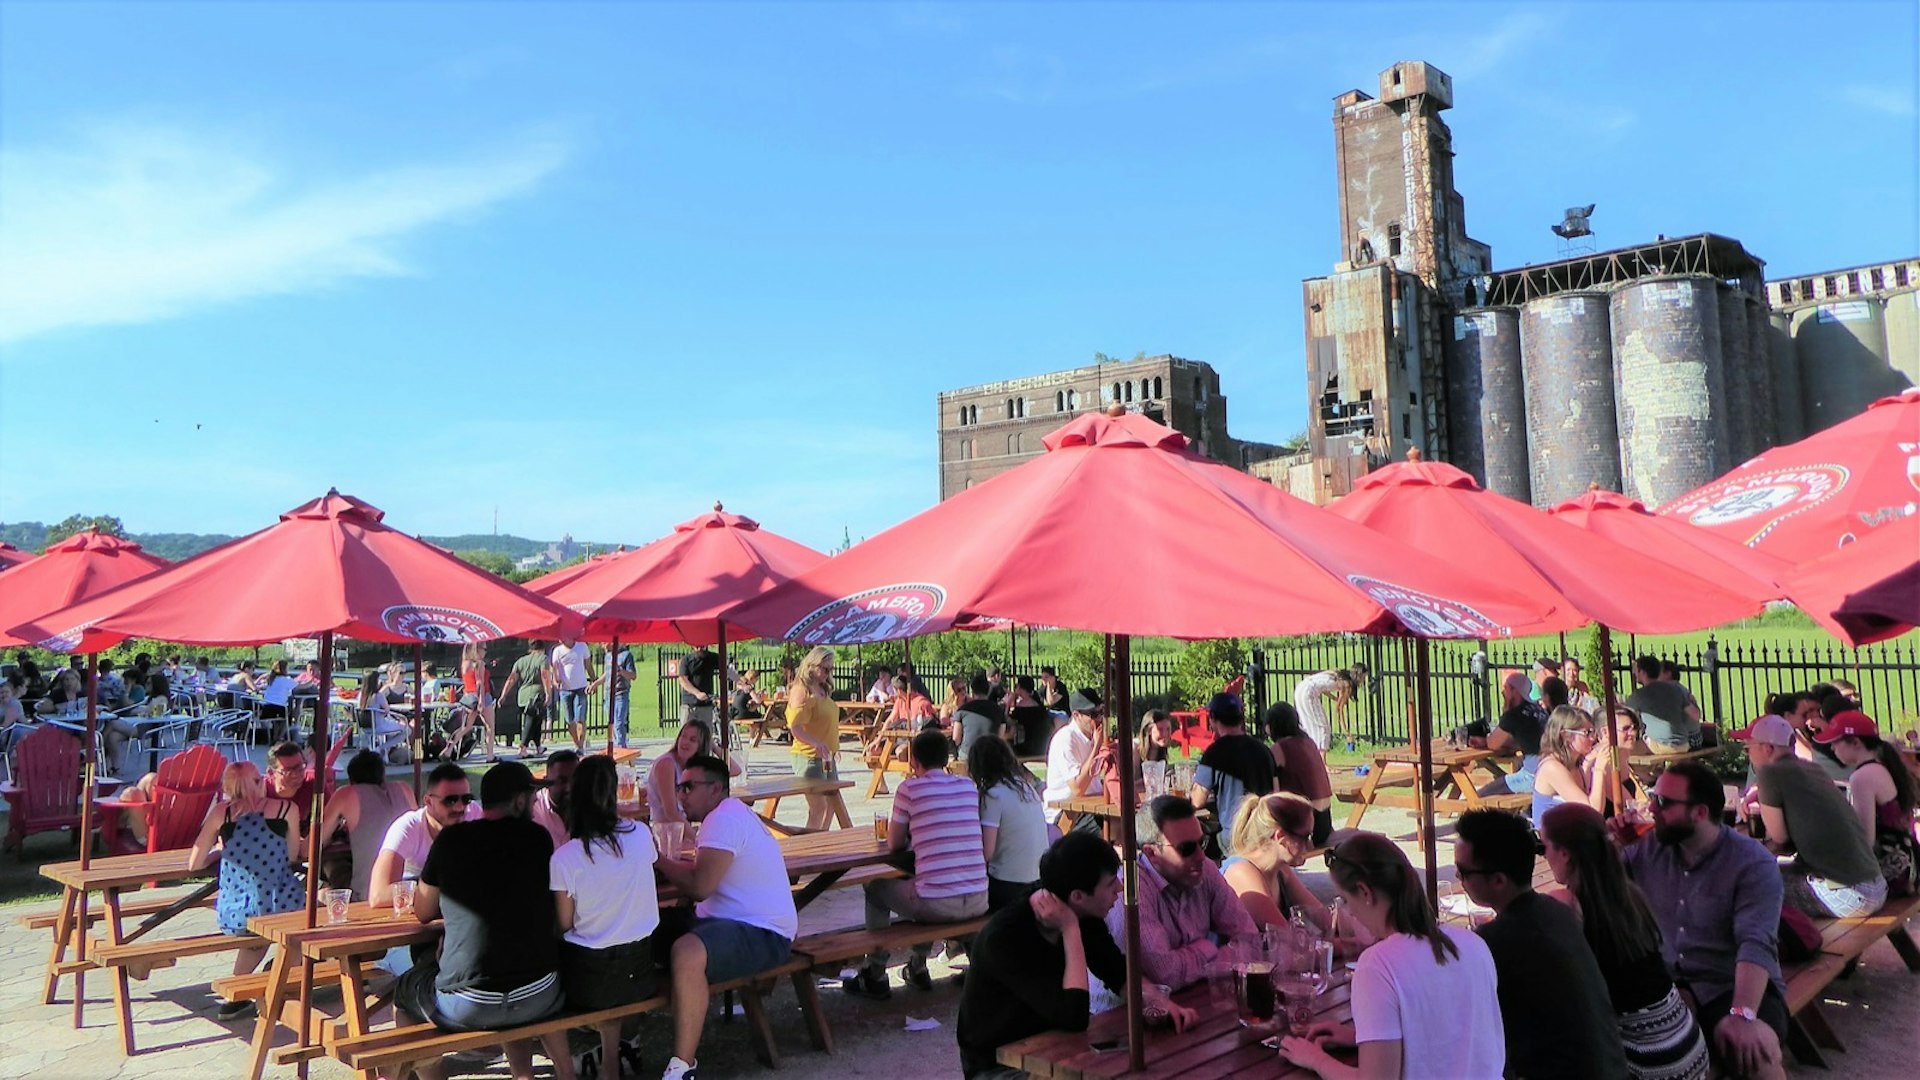 Several bright red umbrellas dominate a sunny patio with patrons drinking and socializing. In the distance is a dilapidated building © Jason Najum / Lonely Planet